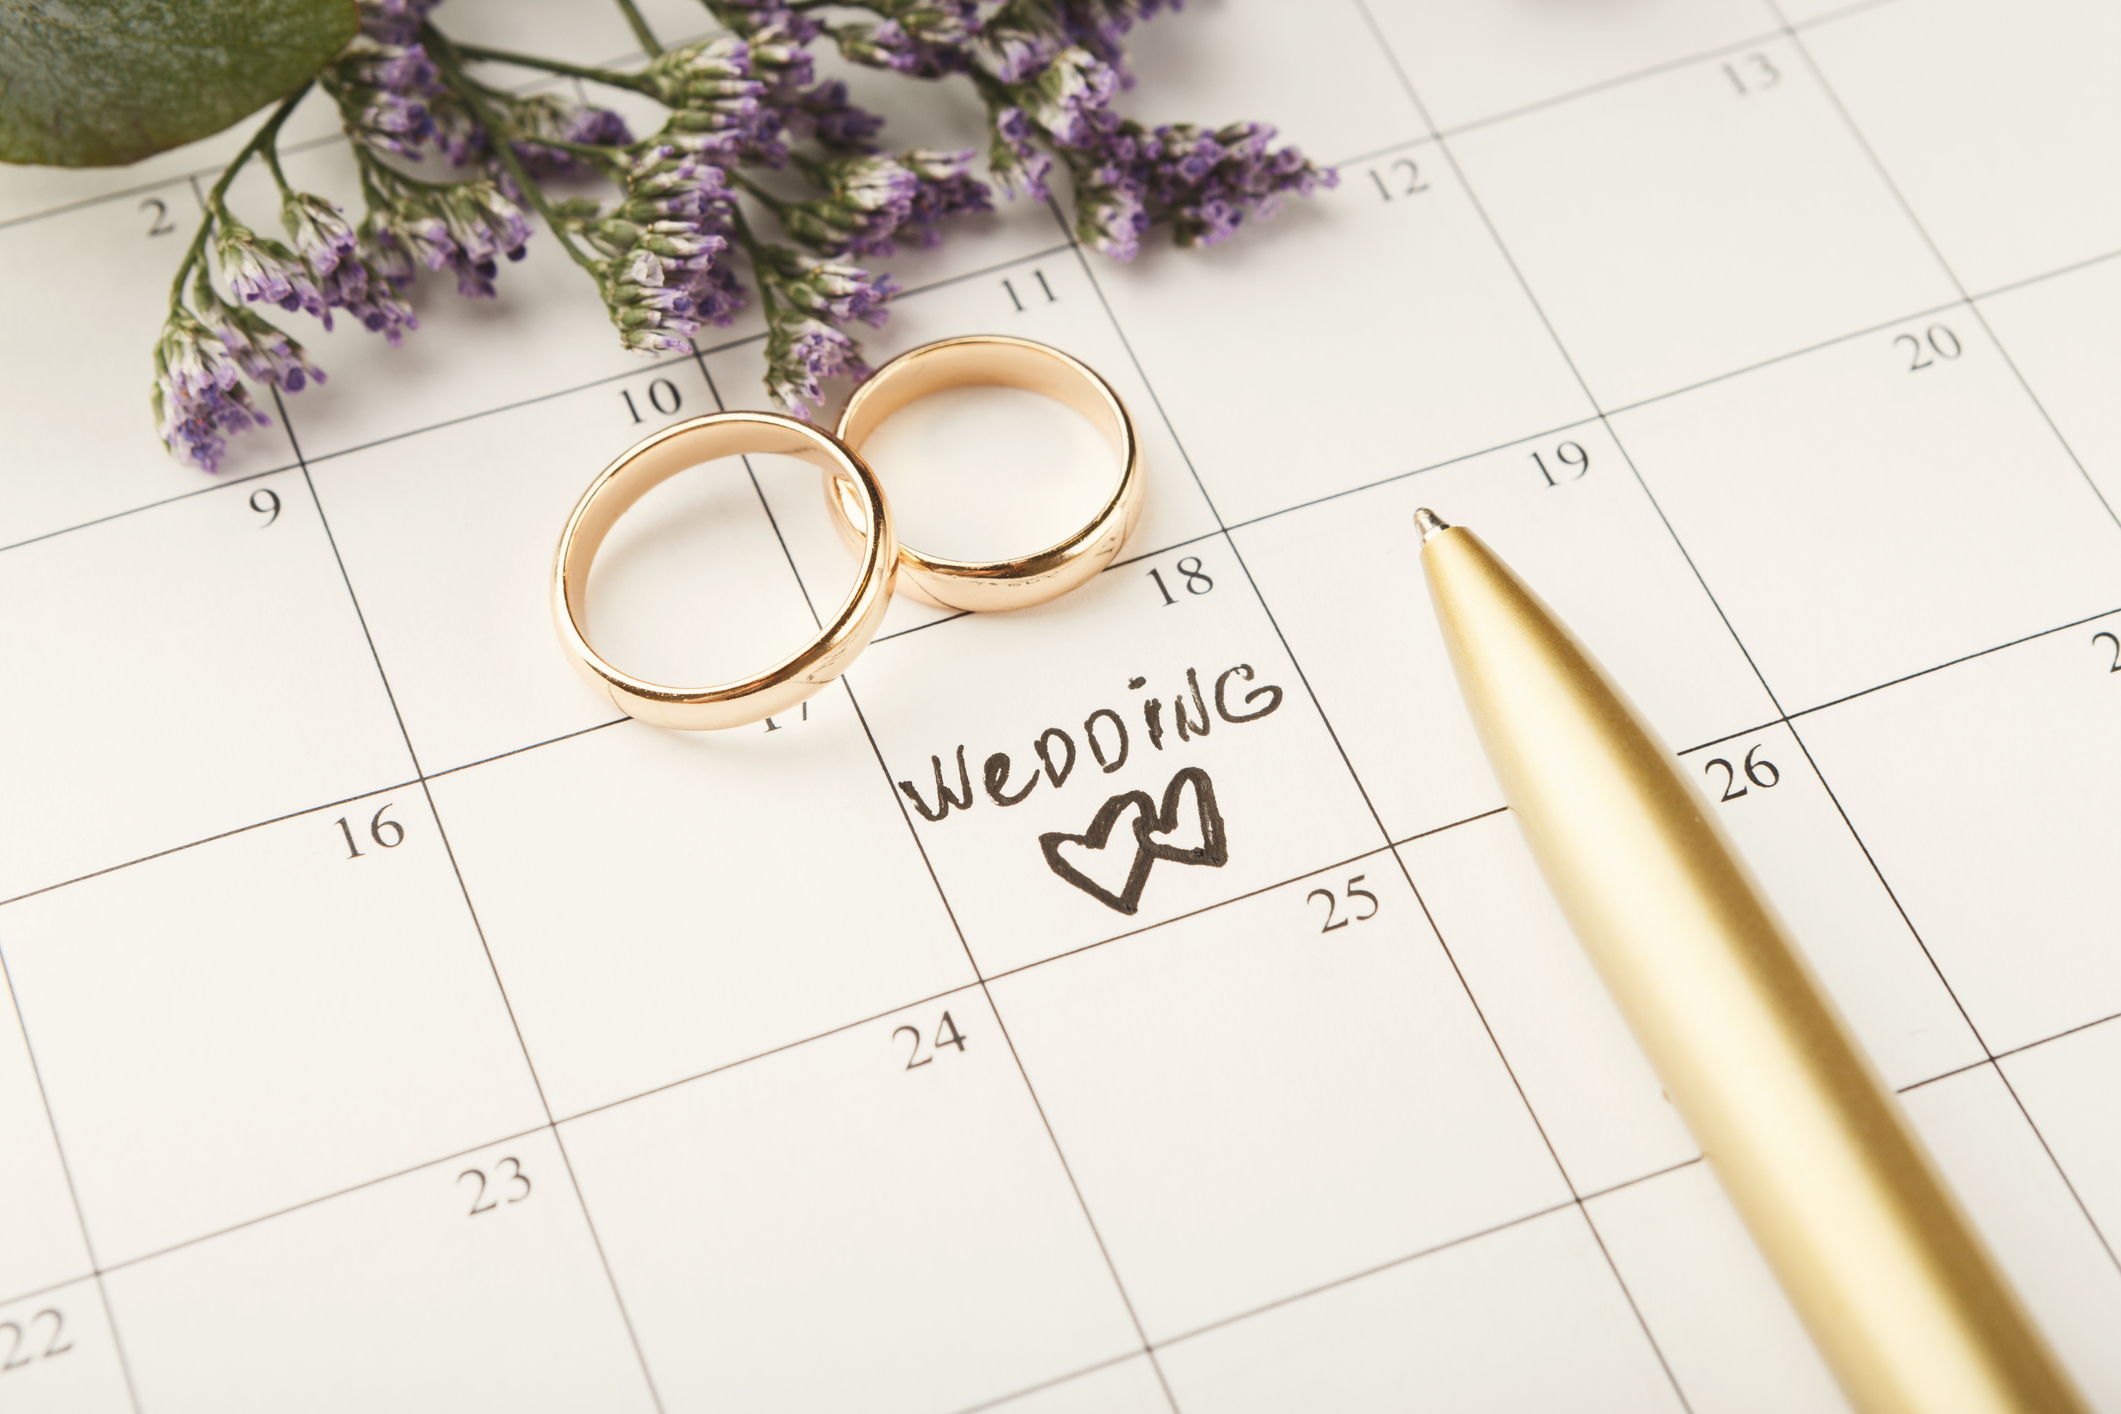 Wedding rings on a calendar with a wedding date penciled in